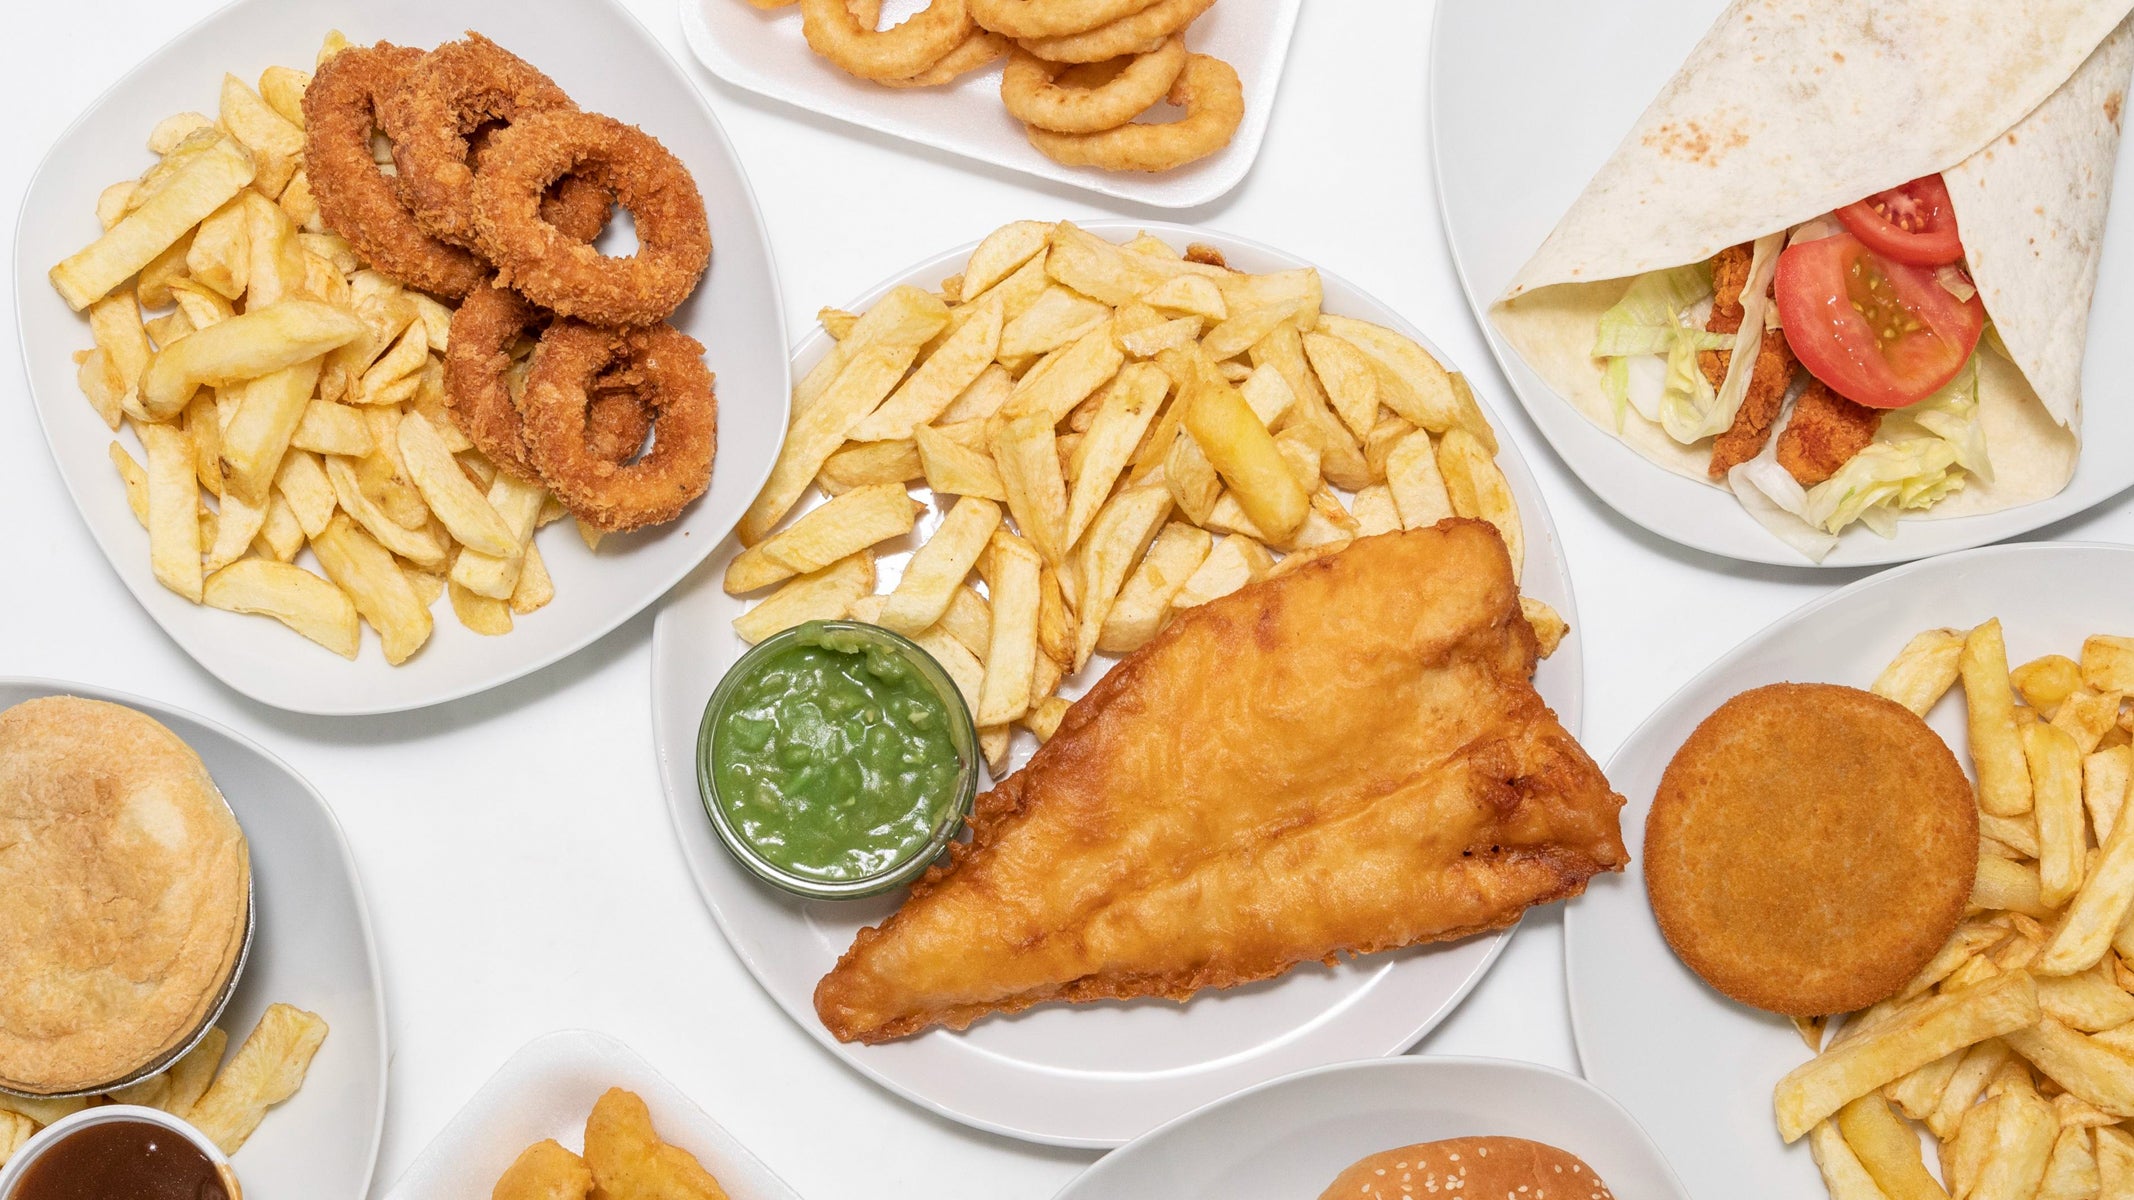 Wendy's Traditional Fish and Chips delivery from Hove Edge/ Elland